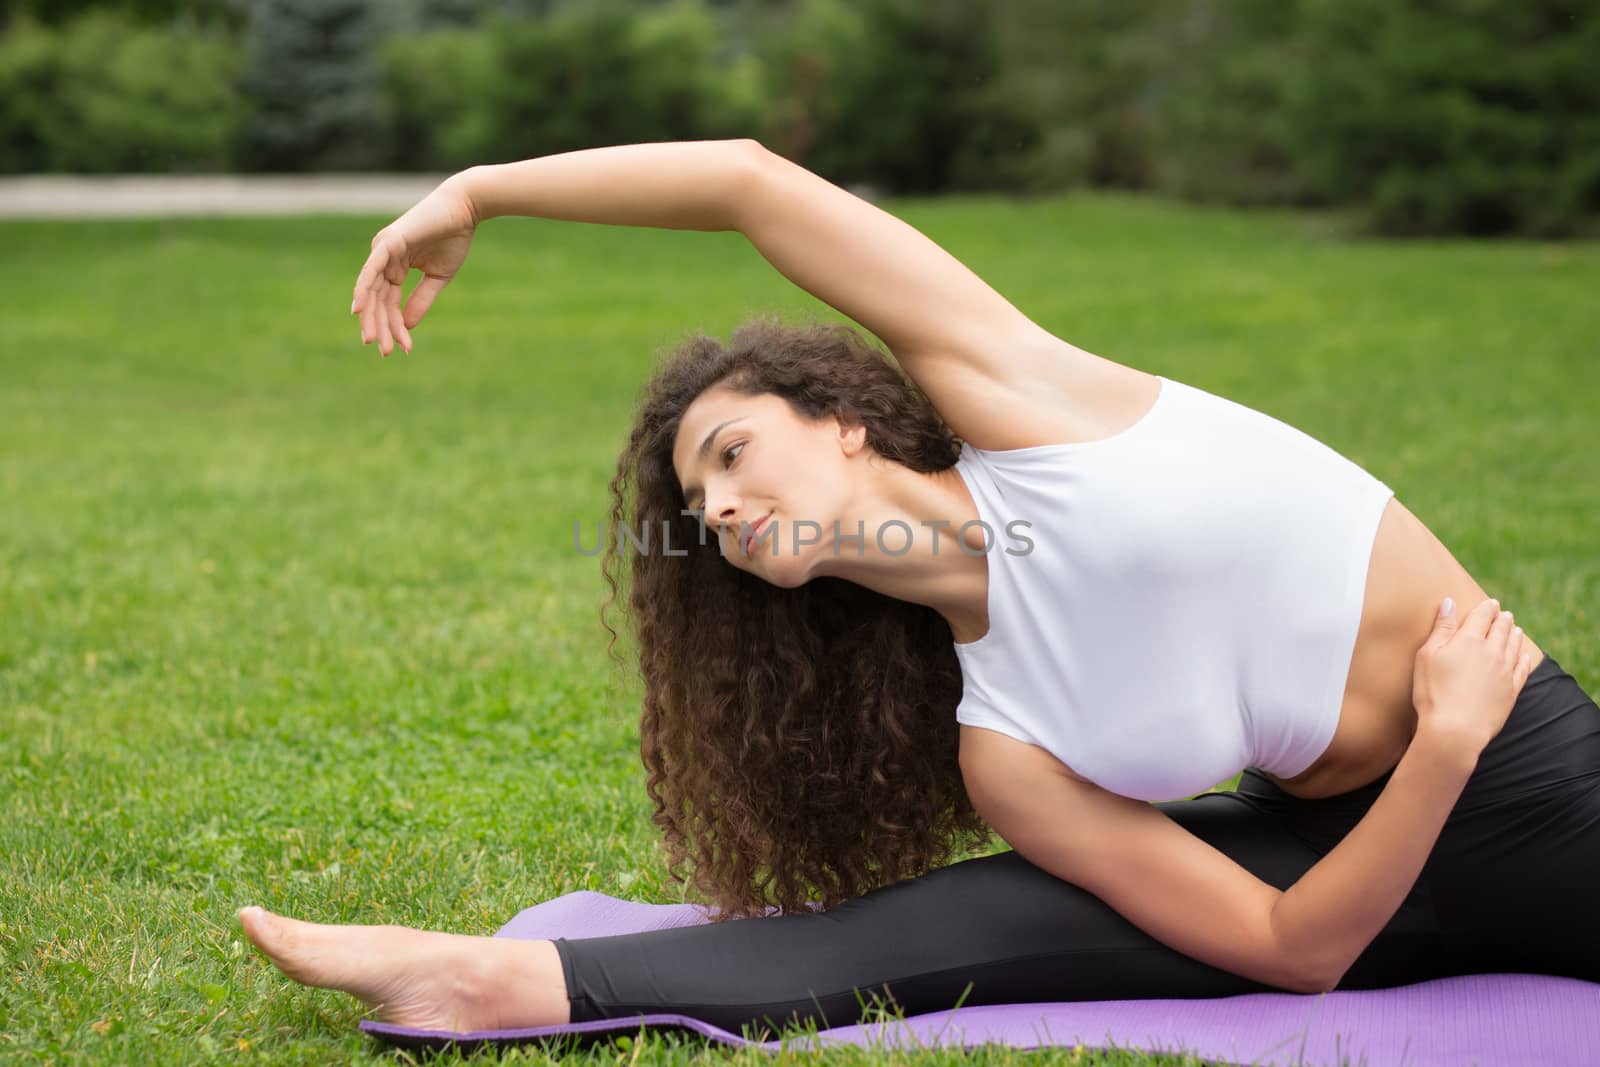 Pretty woman doing yoga exercises in outdoor park, green grass background 